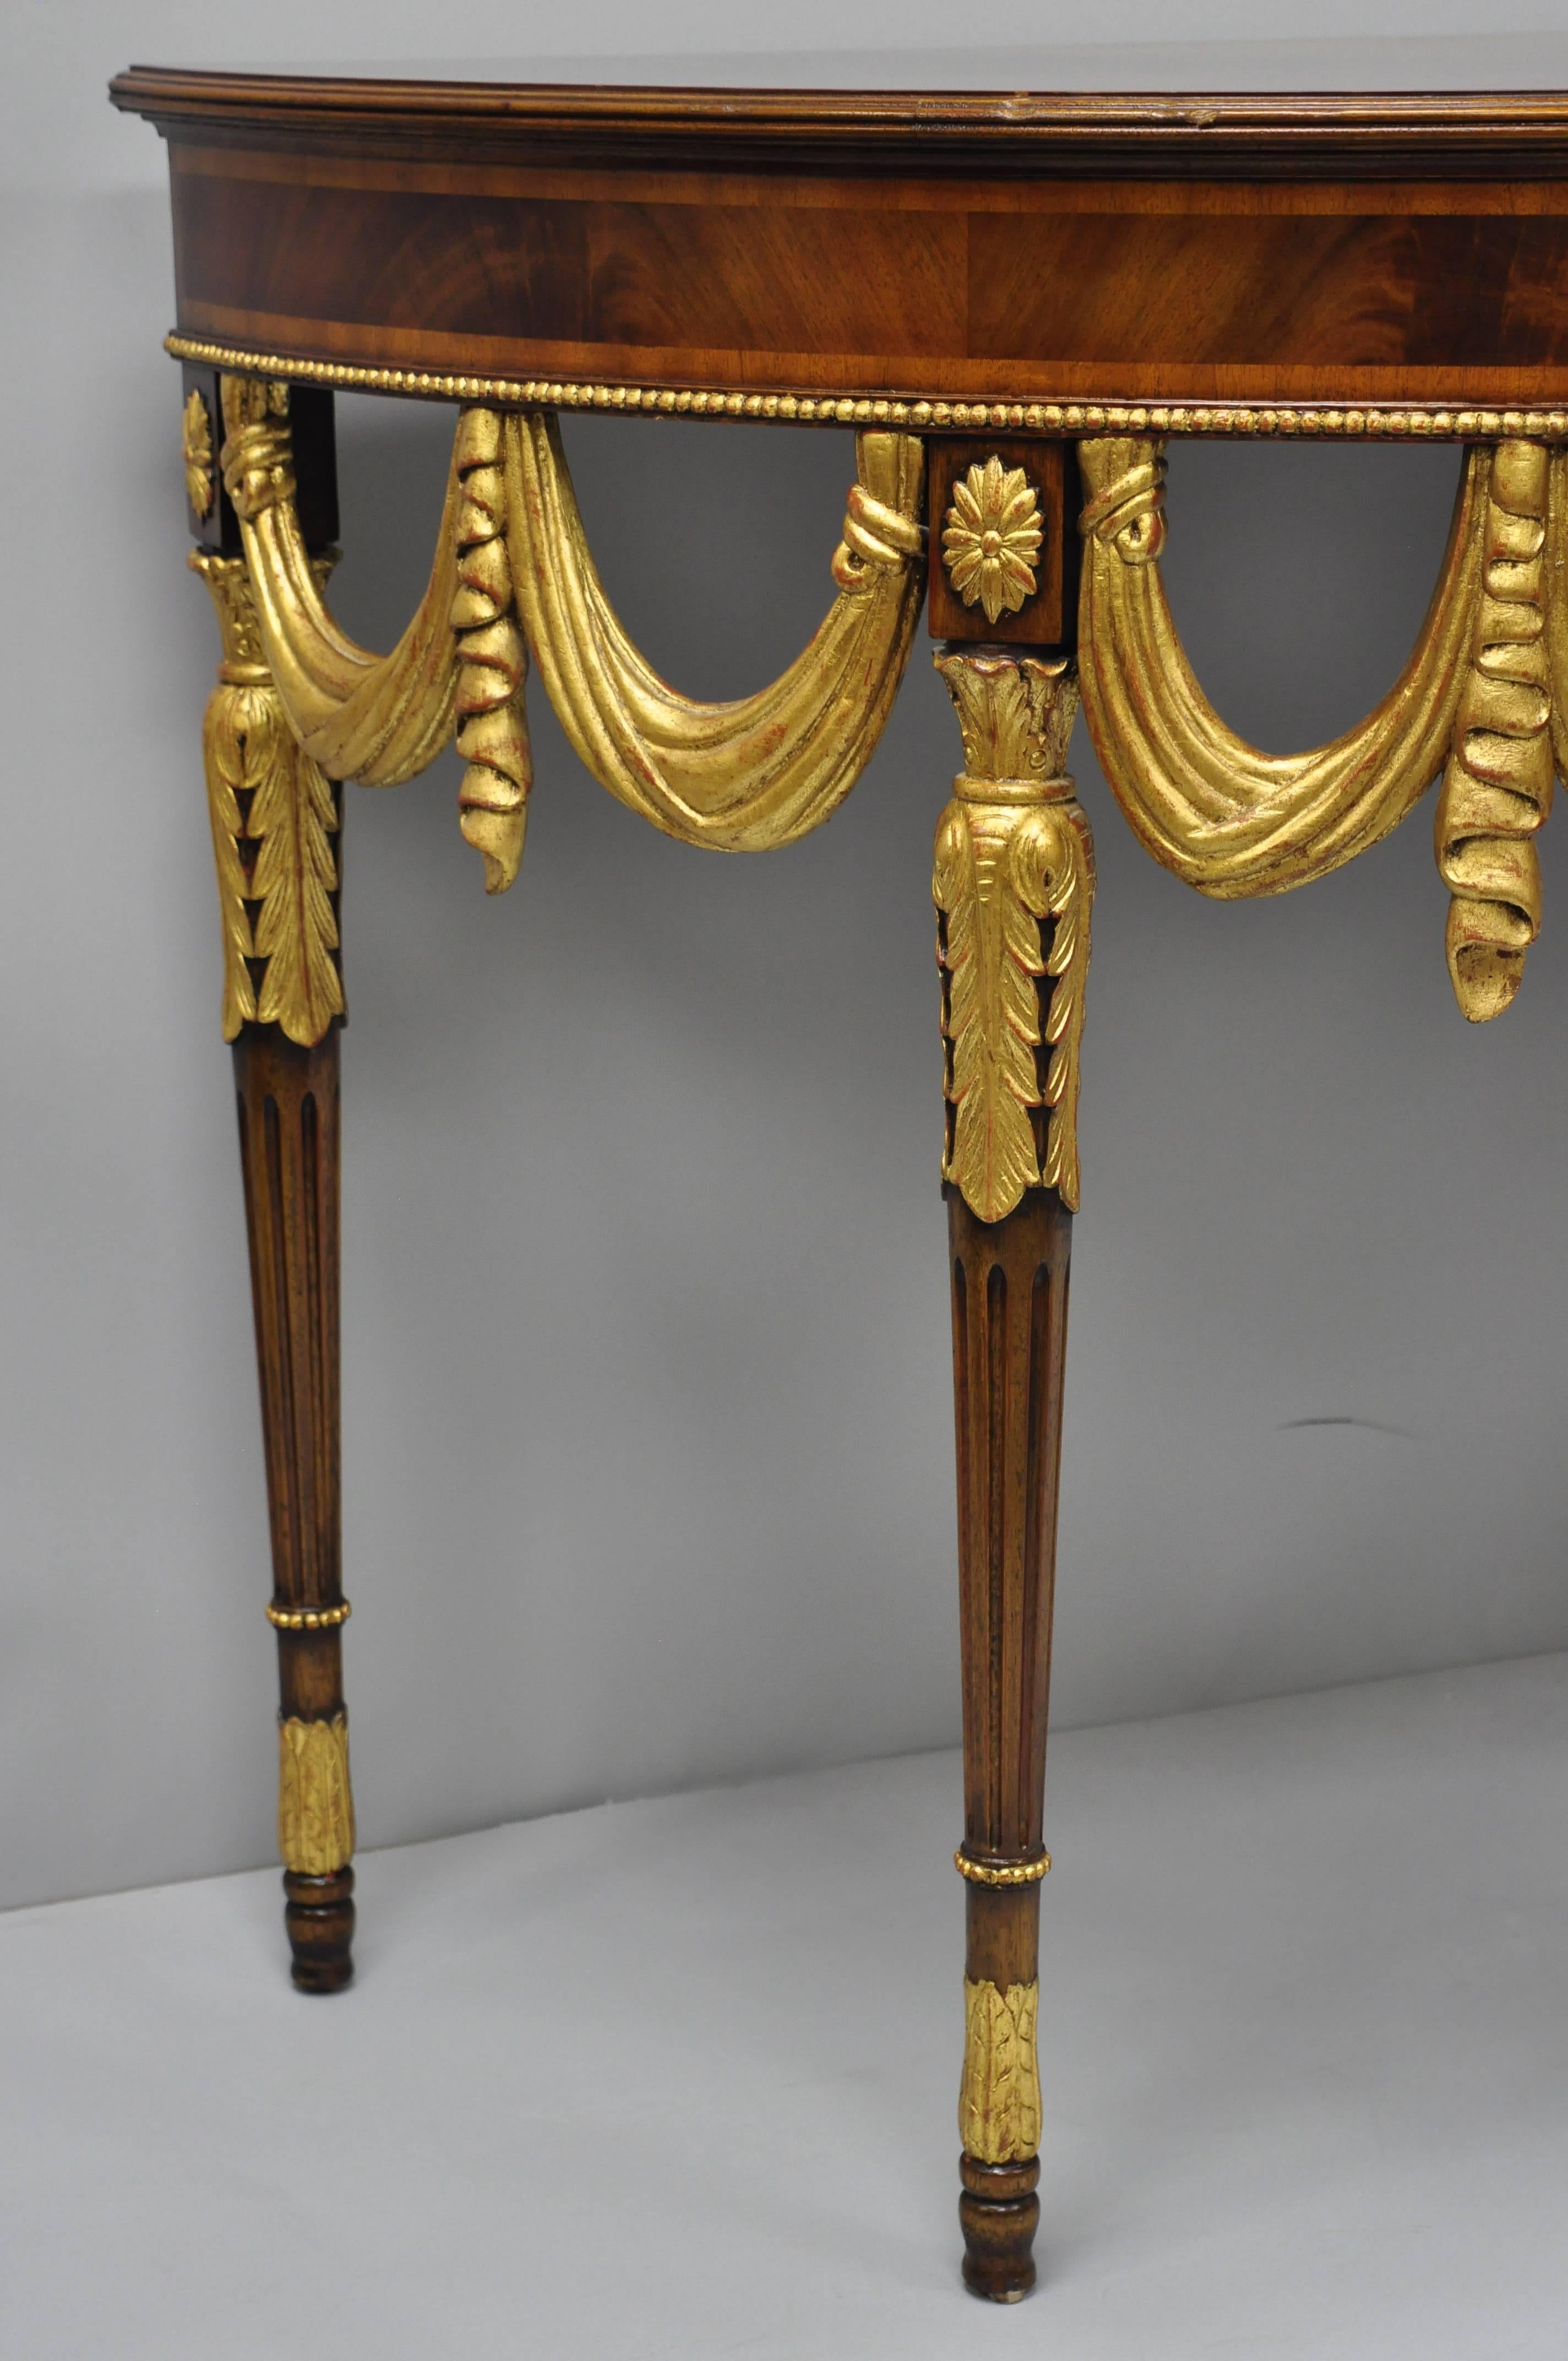 Neoclassical Maitland Smith Half Round Demilune Inlaid Console Table Regency Gold Gilt Drapes